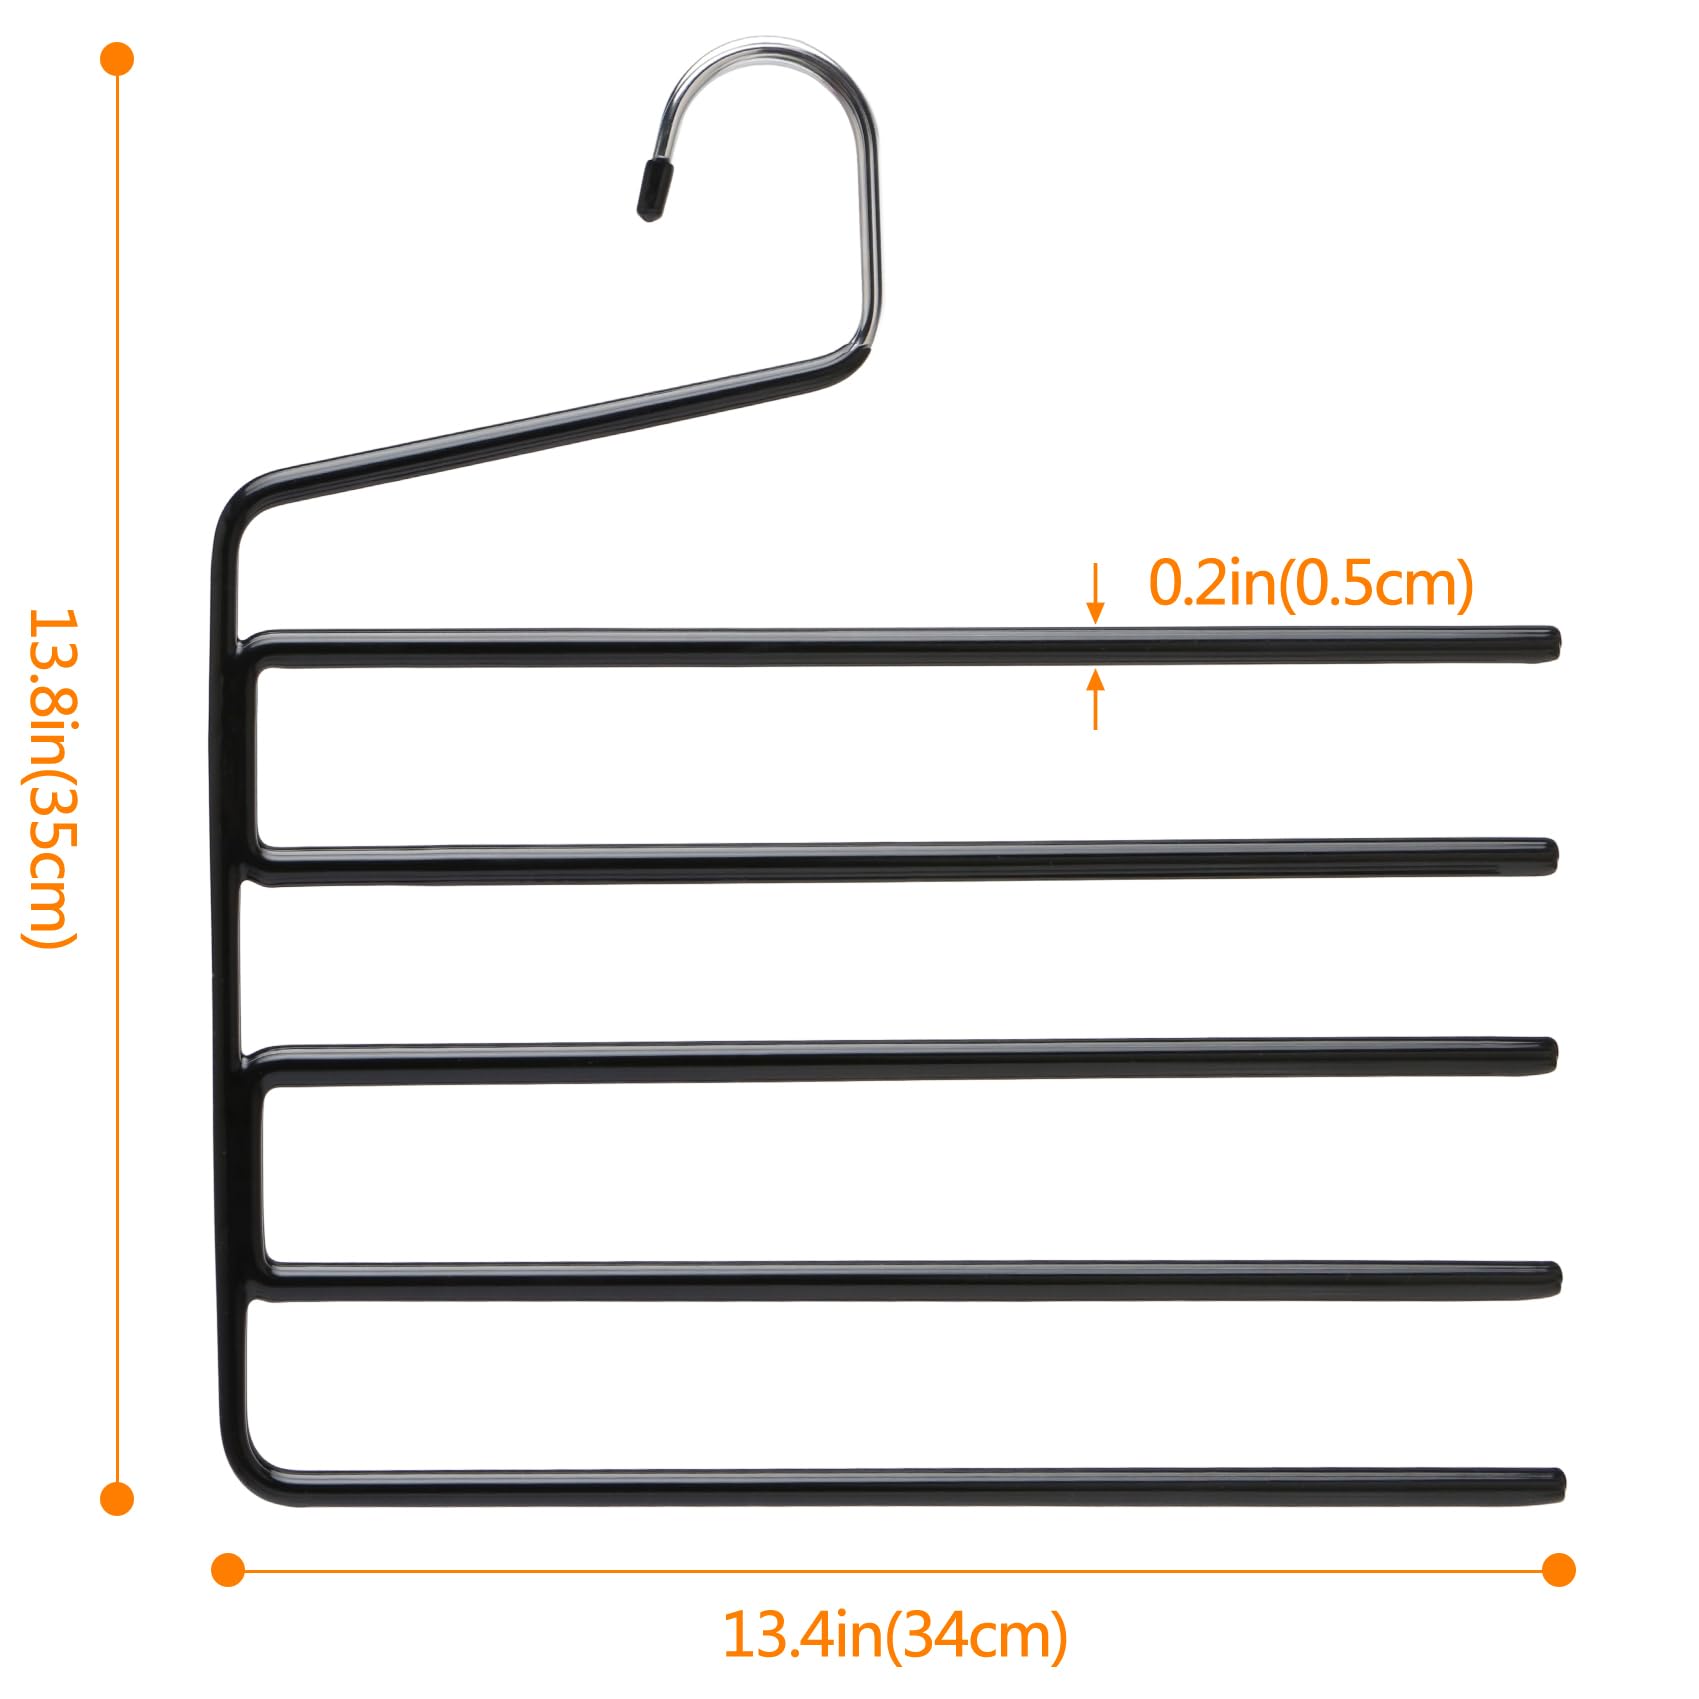 3 Pack Closet-Organizers-and-Storage,5-Tier Closet-Organizer Pants-Hangers-Space-Saving,Dorm Room Essentials for College Students Girls Boys Guys,Non Slip Organization-and-Storage Scarf Jeans Hangers